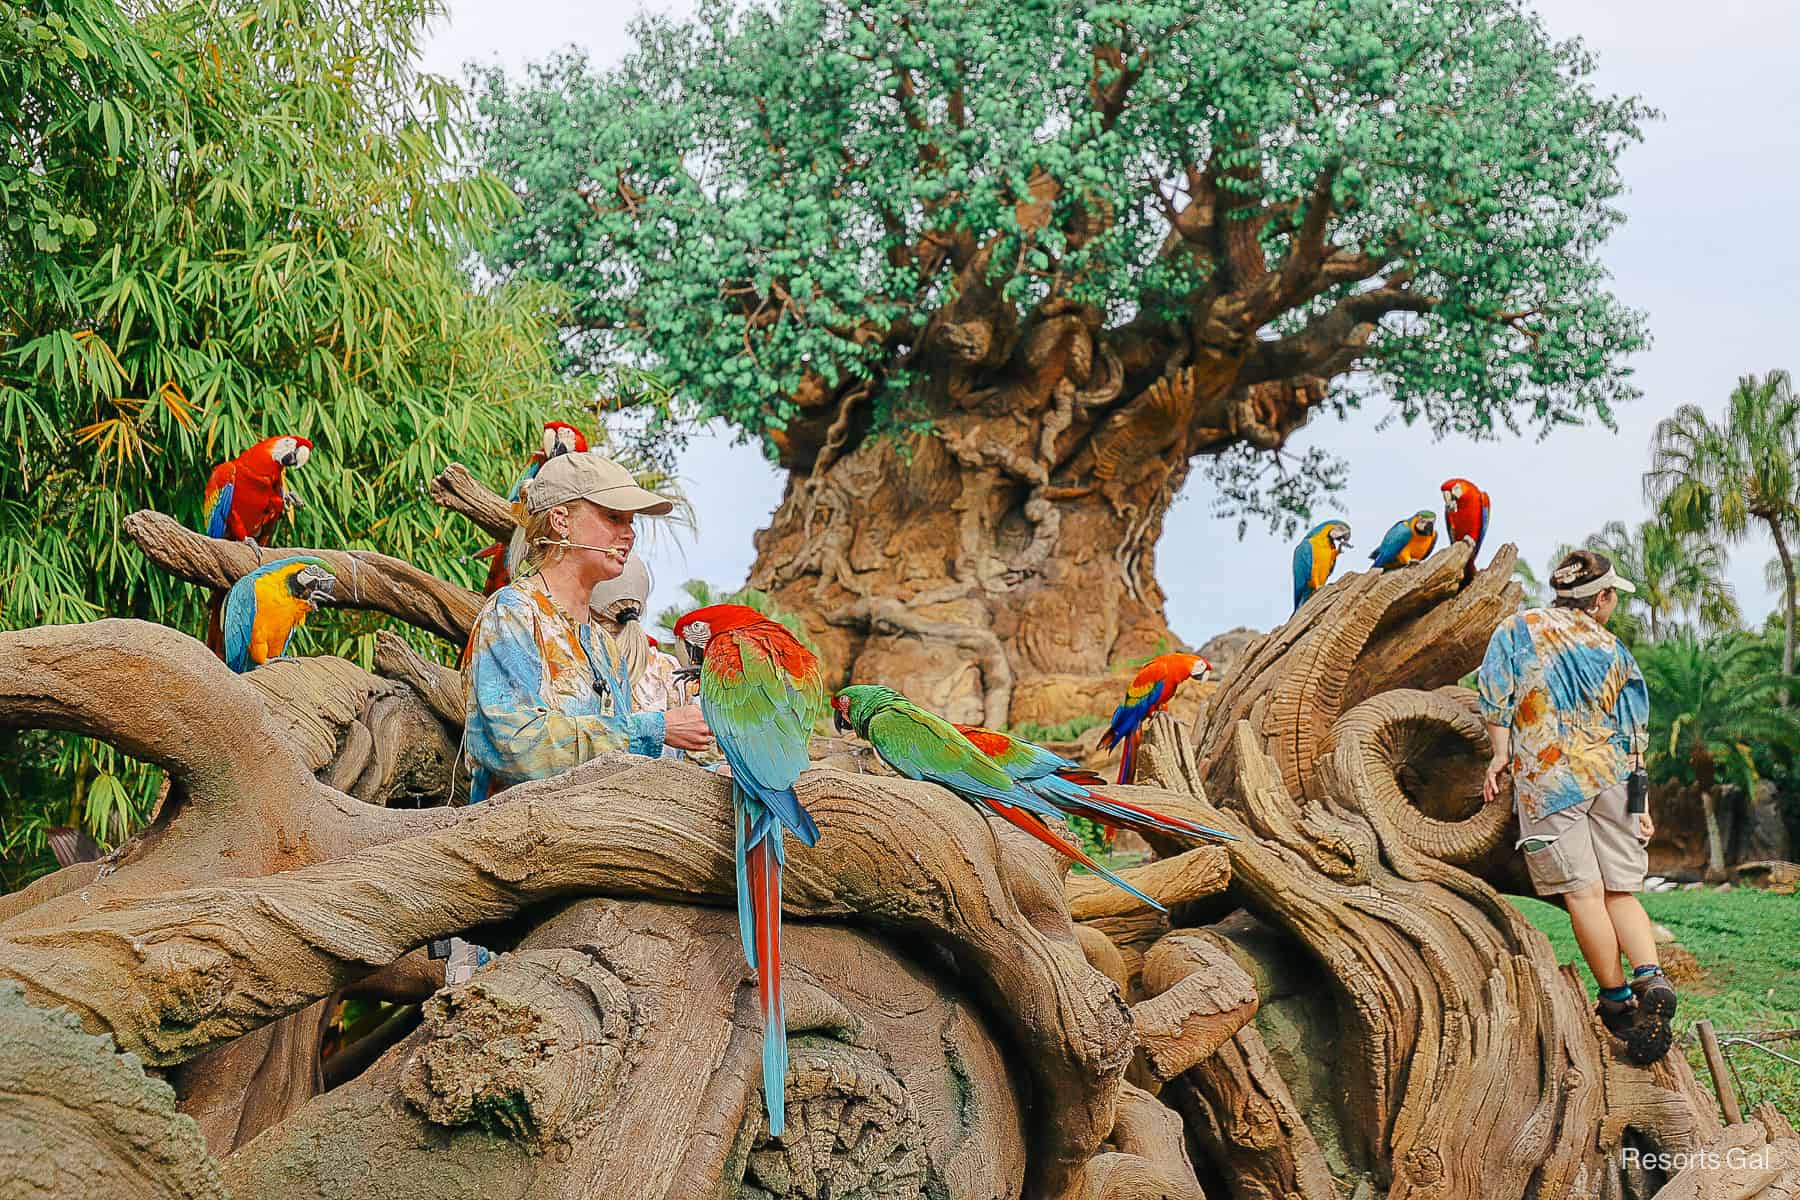 Winged Encounters at Disney’s Animal Kingdom (A Not-To-Be Missed Bird Encounter)